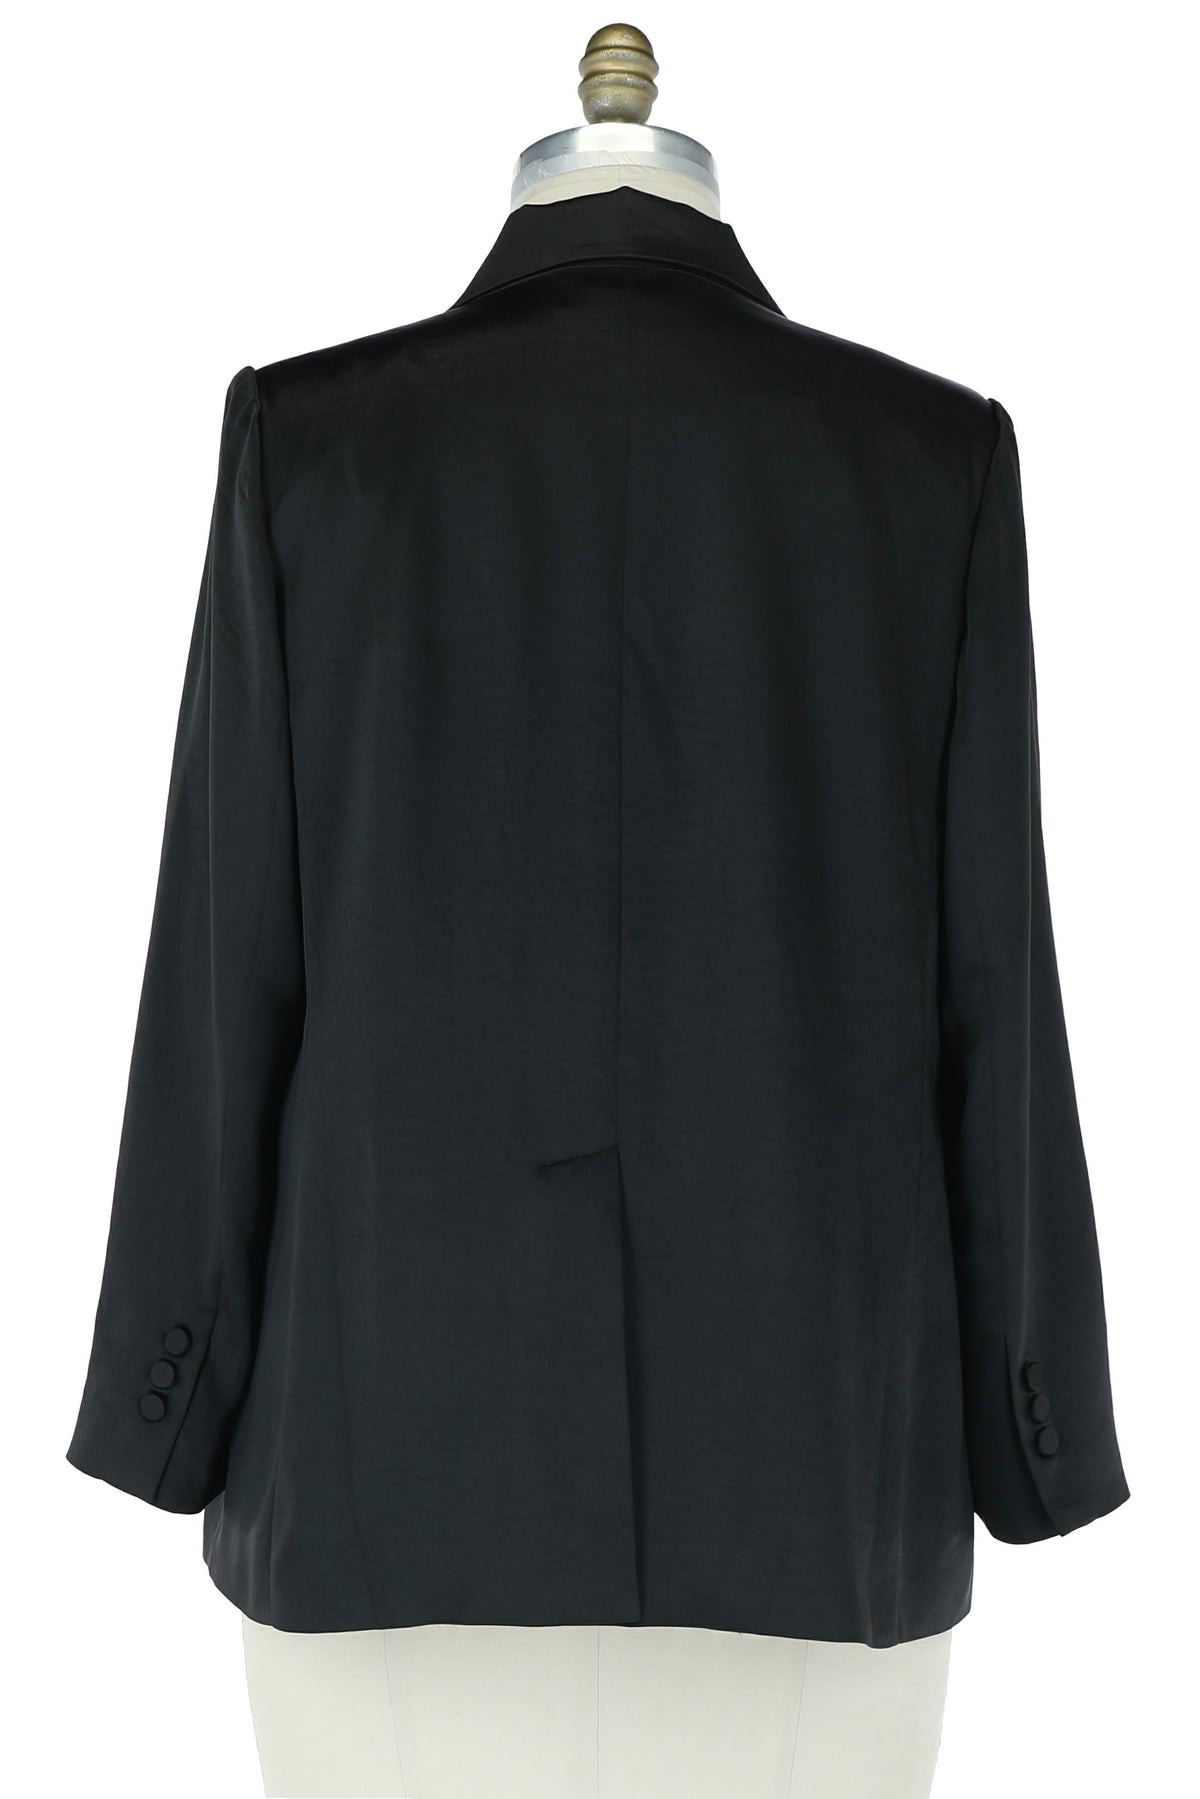 Women's Black Dull Satin Blazer (Available in Regular and Plus Sizes)